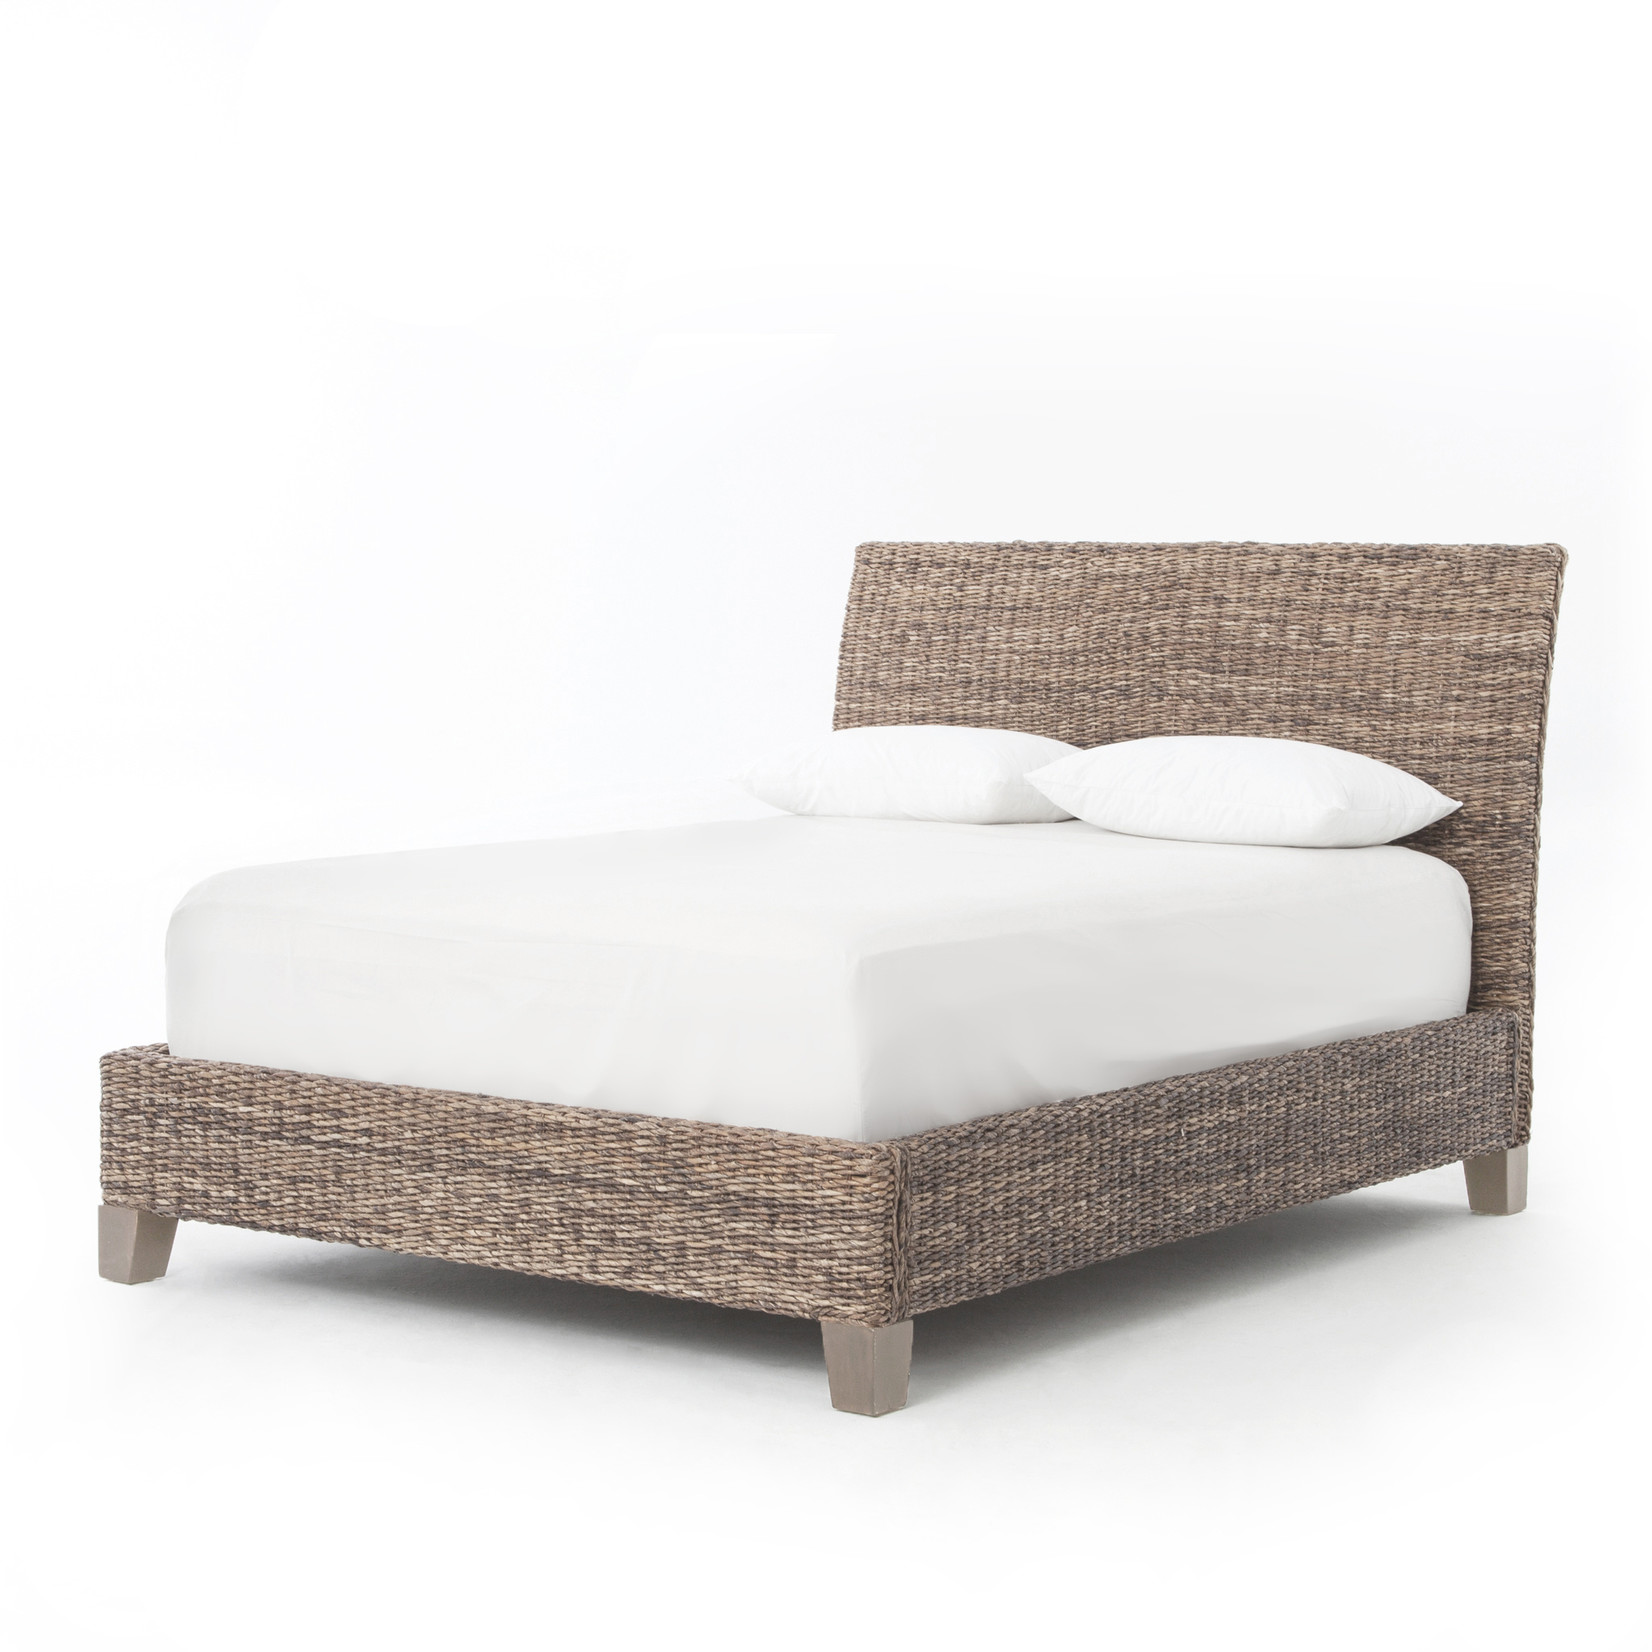 Four Hands Lanai Banana Leaf Queen Bed